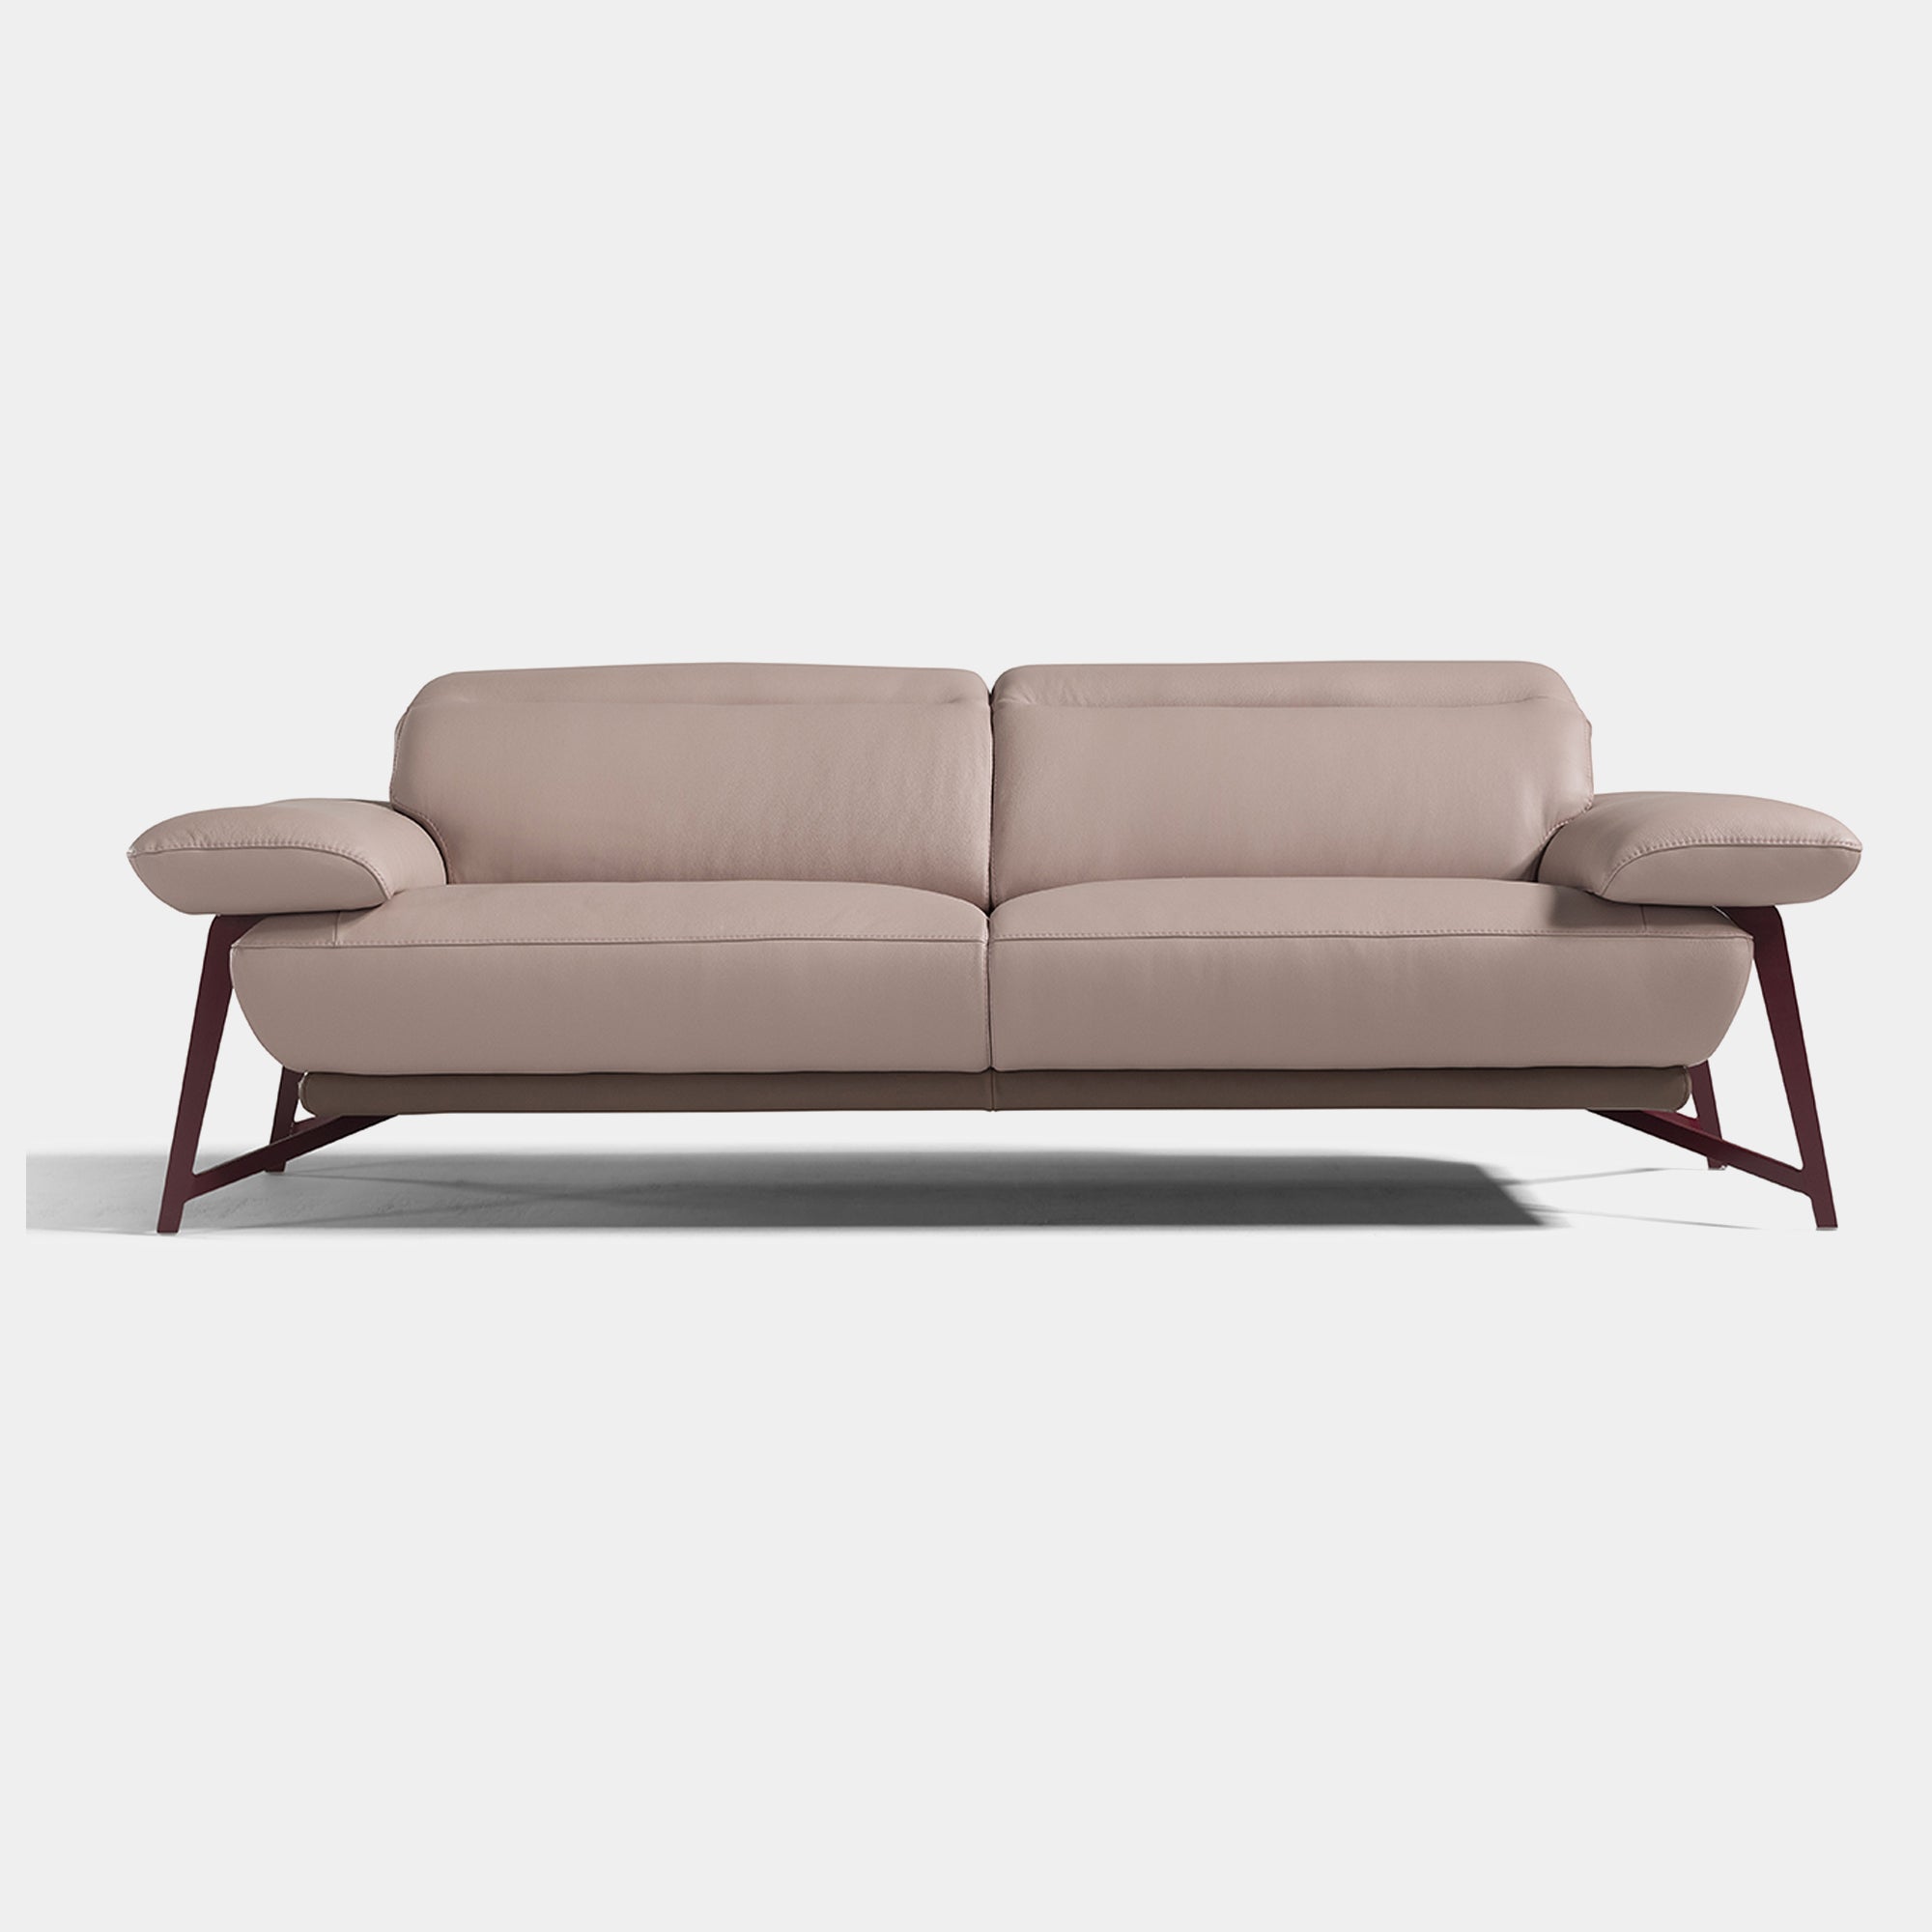 Ancona - 2 Seat Sofa In Fabric Or  Leather Leather Cat B